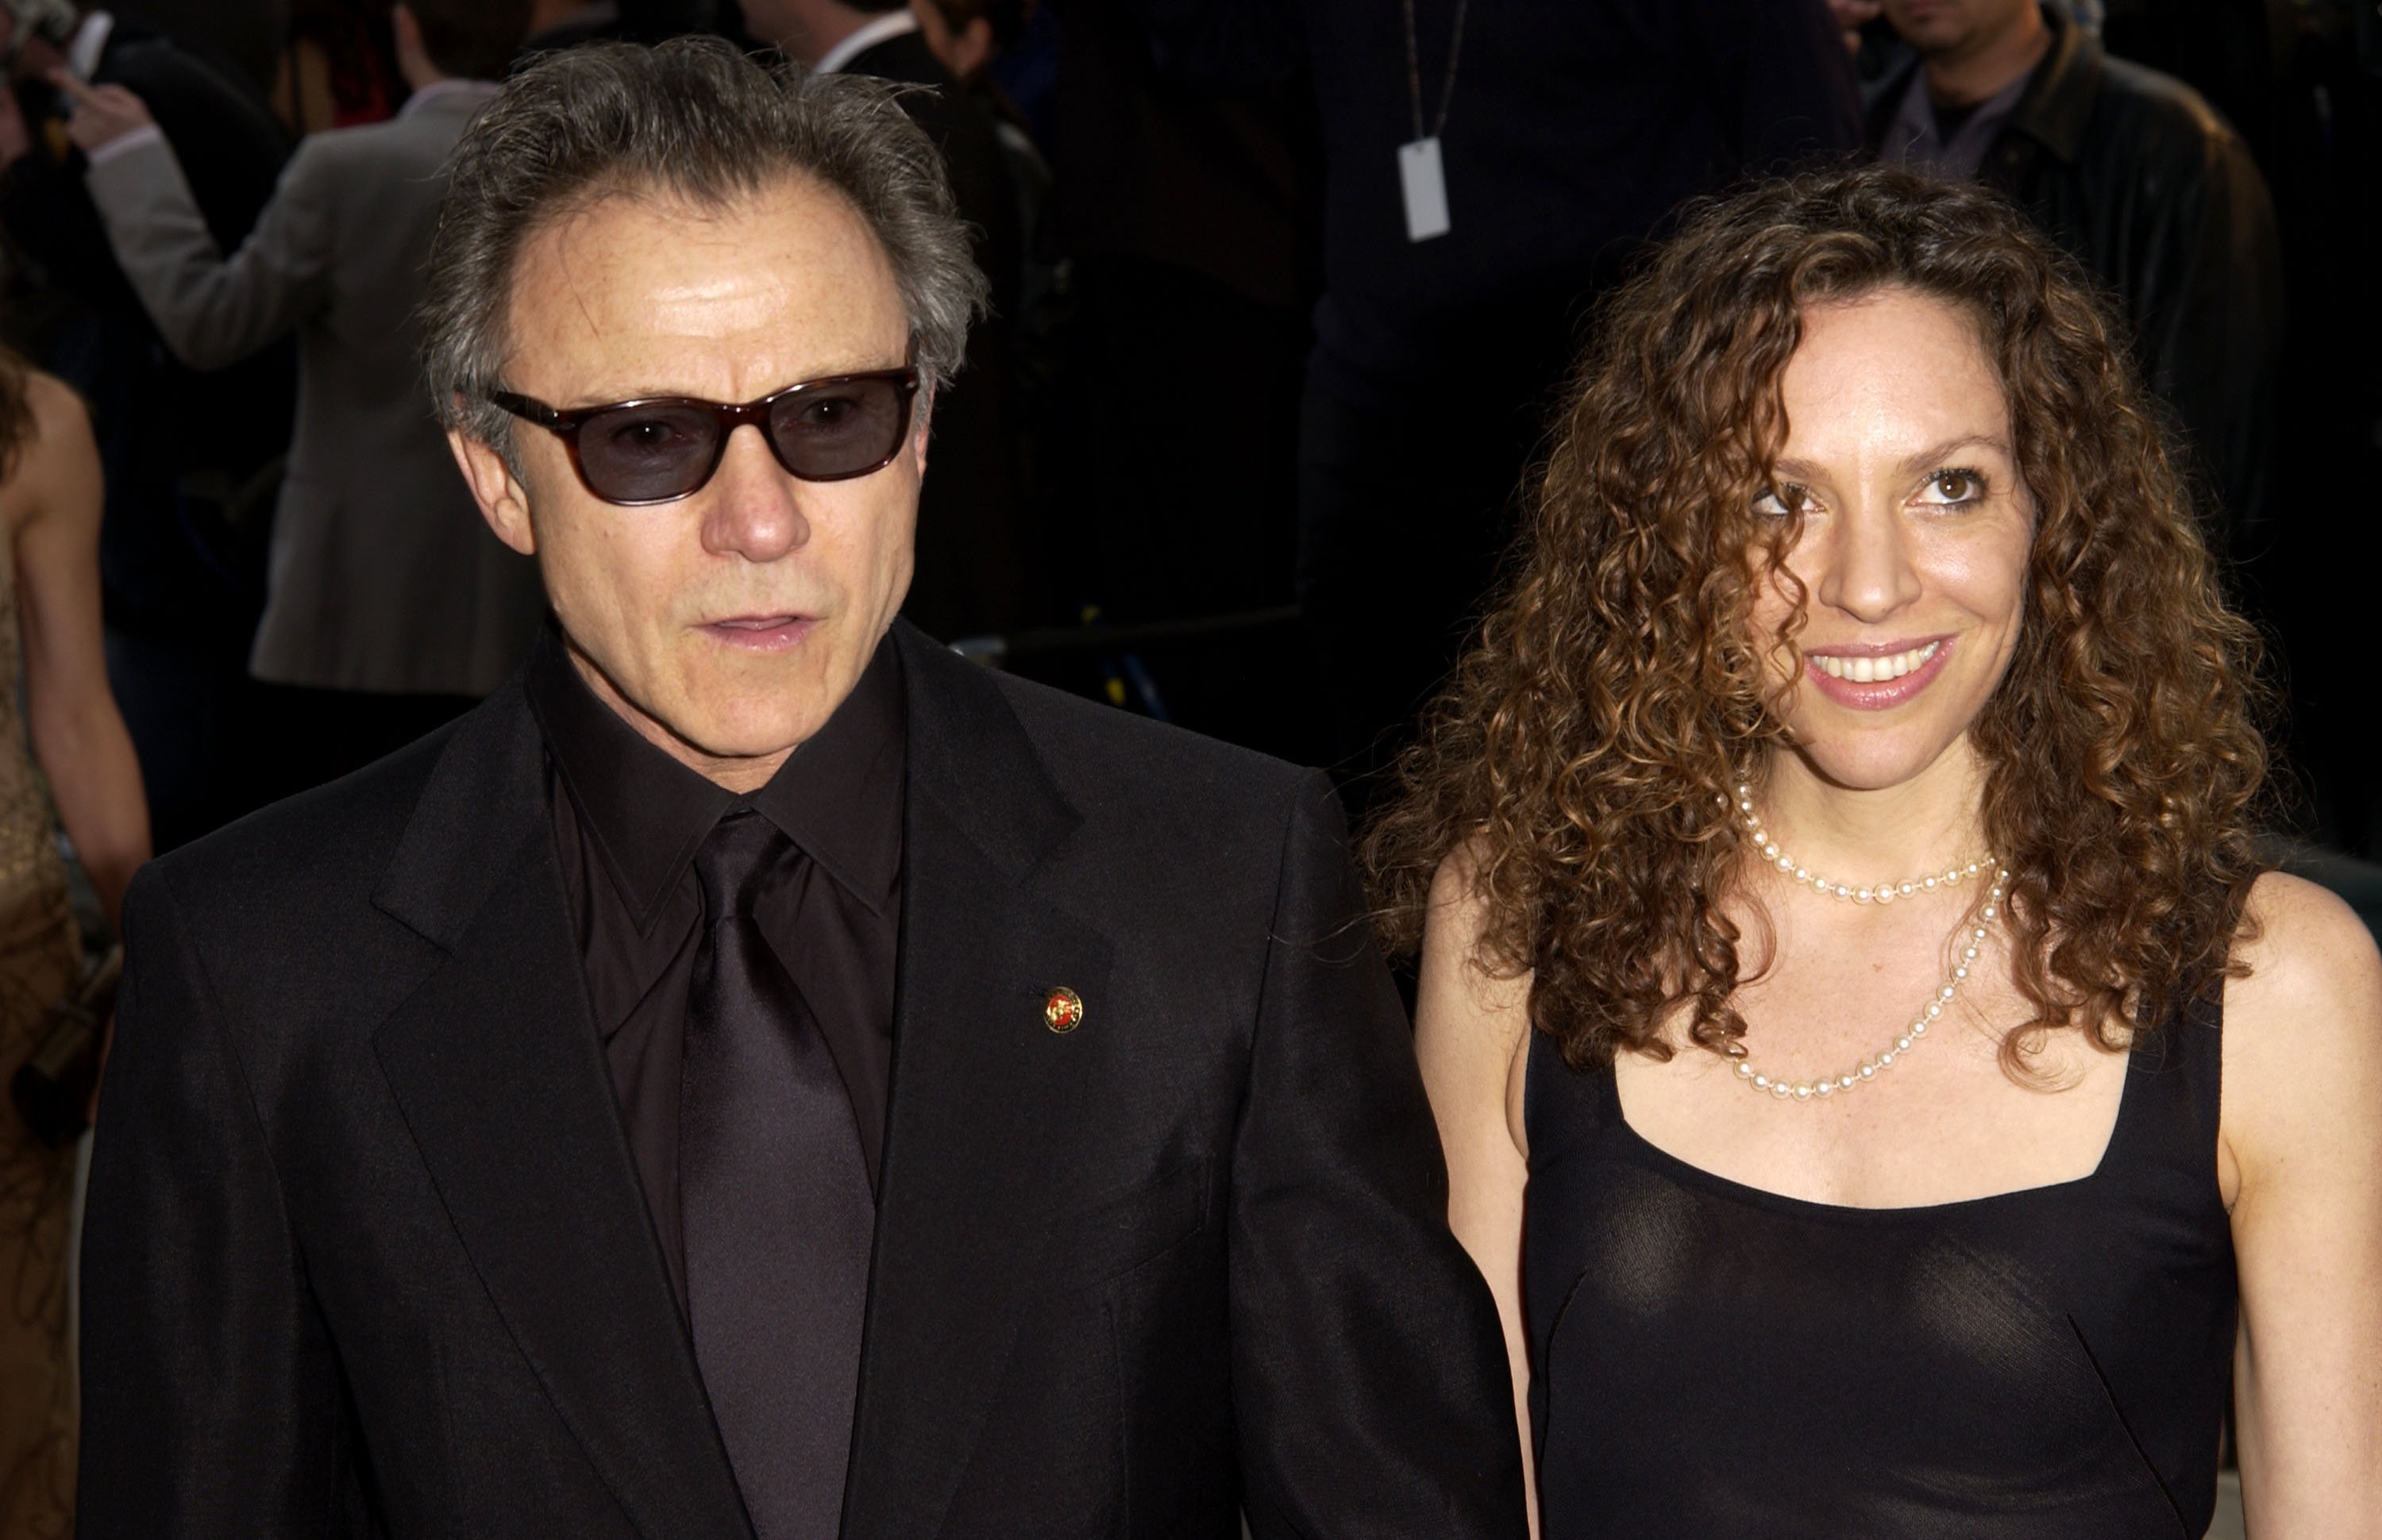 Harvey Keitel & wife during 2002 Vanity Fair Oscar Party Hosted by Graydon Carter - Arrivals at Morton's Restaurant in Beverly Hills, California, United States. | Source: Getty Images